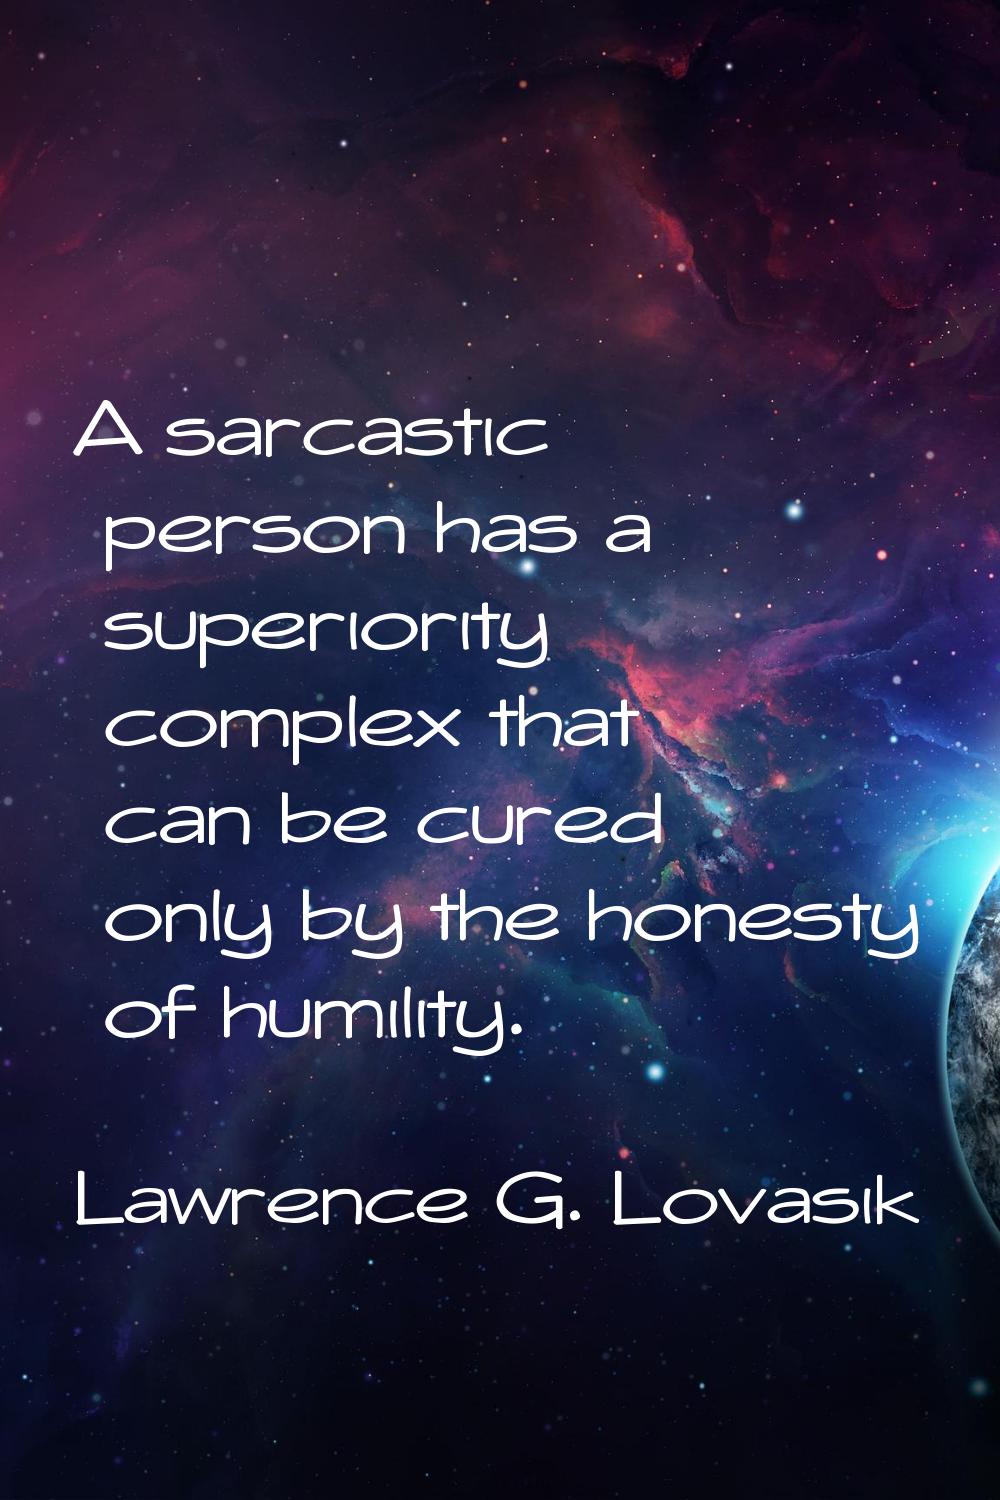 A sarcastic person has a superiority complex that can be cured only by the honesty of humility.